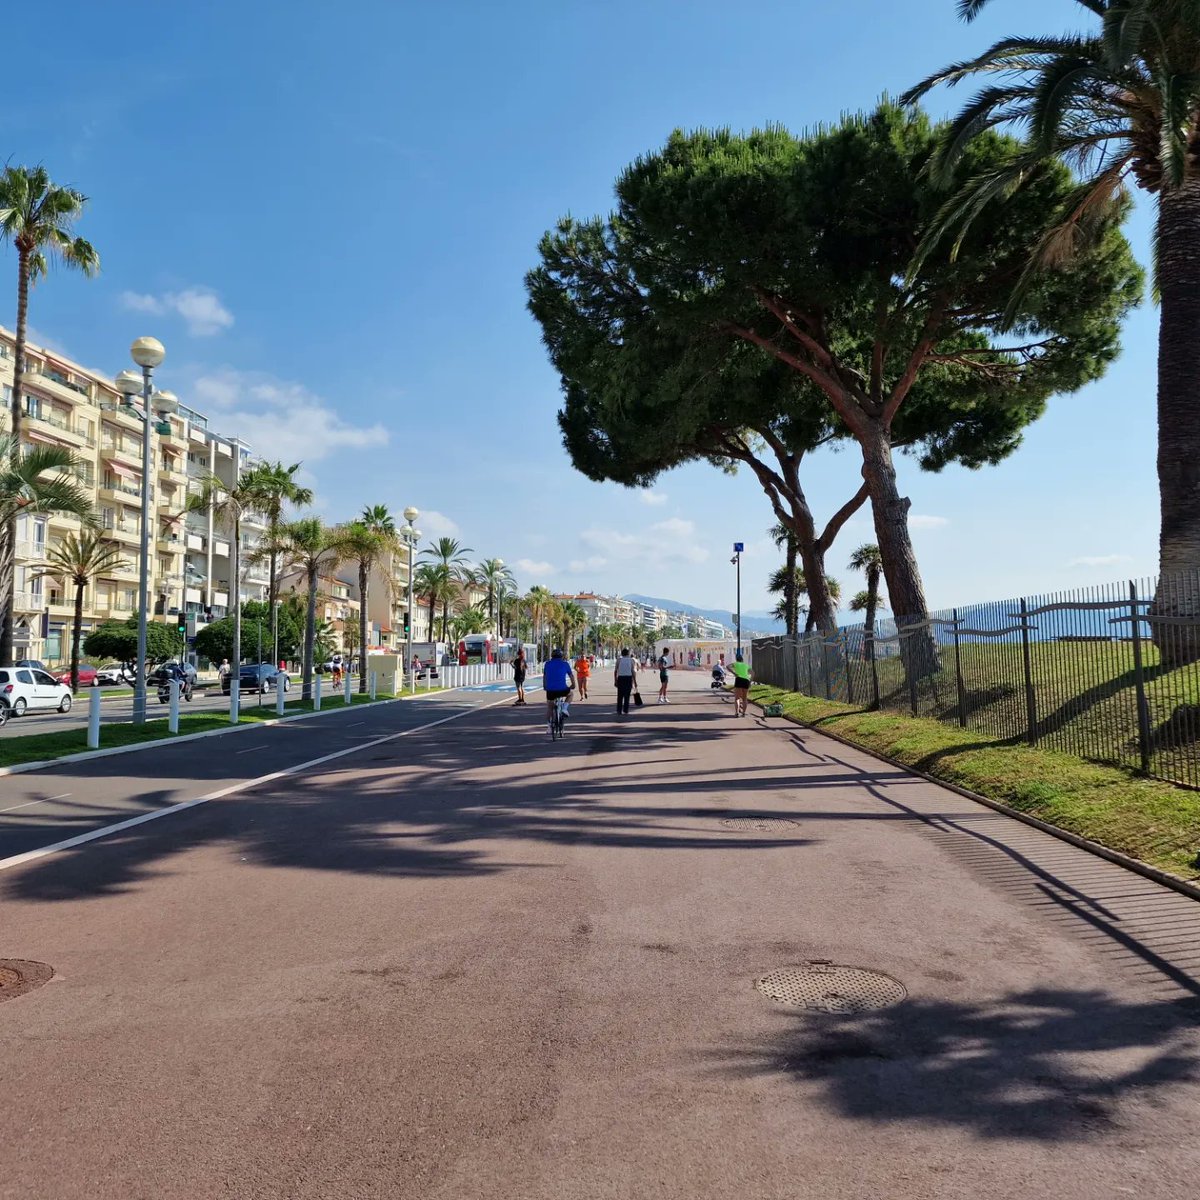 Morning run in Nice! From one end of Promenade des Anglais to the other. Perfect spot to run even though too warm already at 9AM 🥵😅 #PromenadeDesAnglais #Running #HCRD2023 #hcrd #Nice #Nizza #CotedAzur #FrenchRiviera #France #ILoveNice